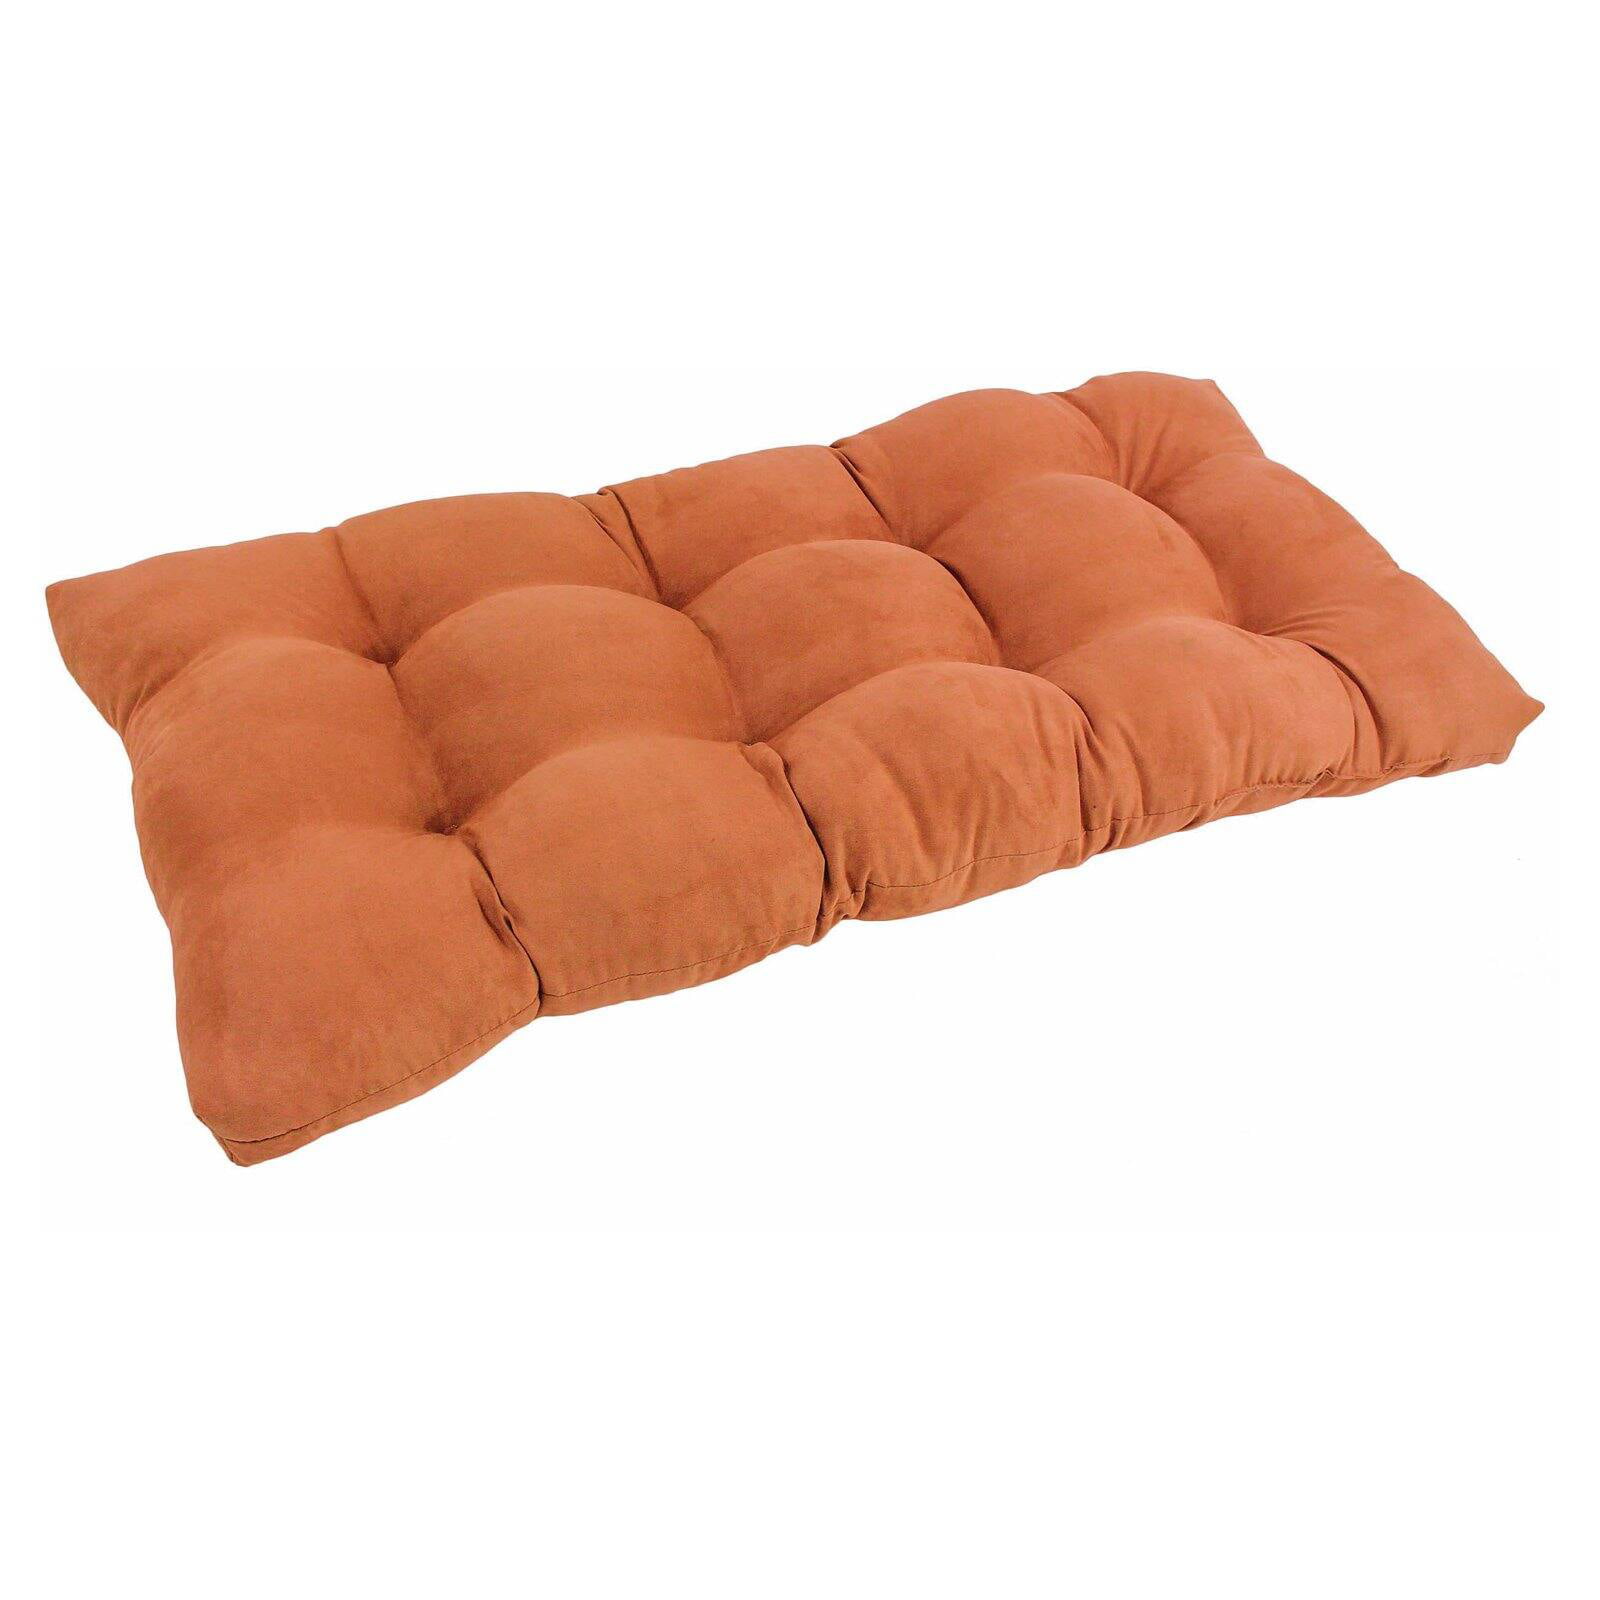 42-inch by 19-inch Squared Twill Tufted Loveseat Cushion Chocolate 